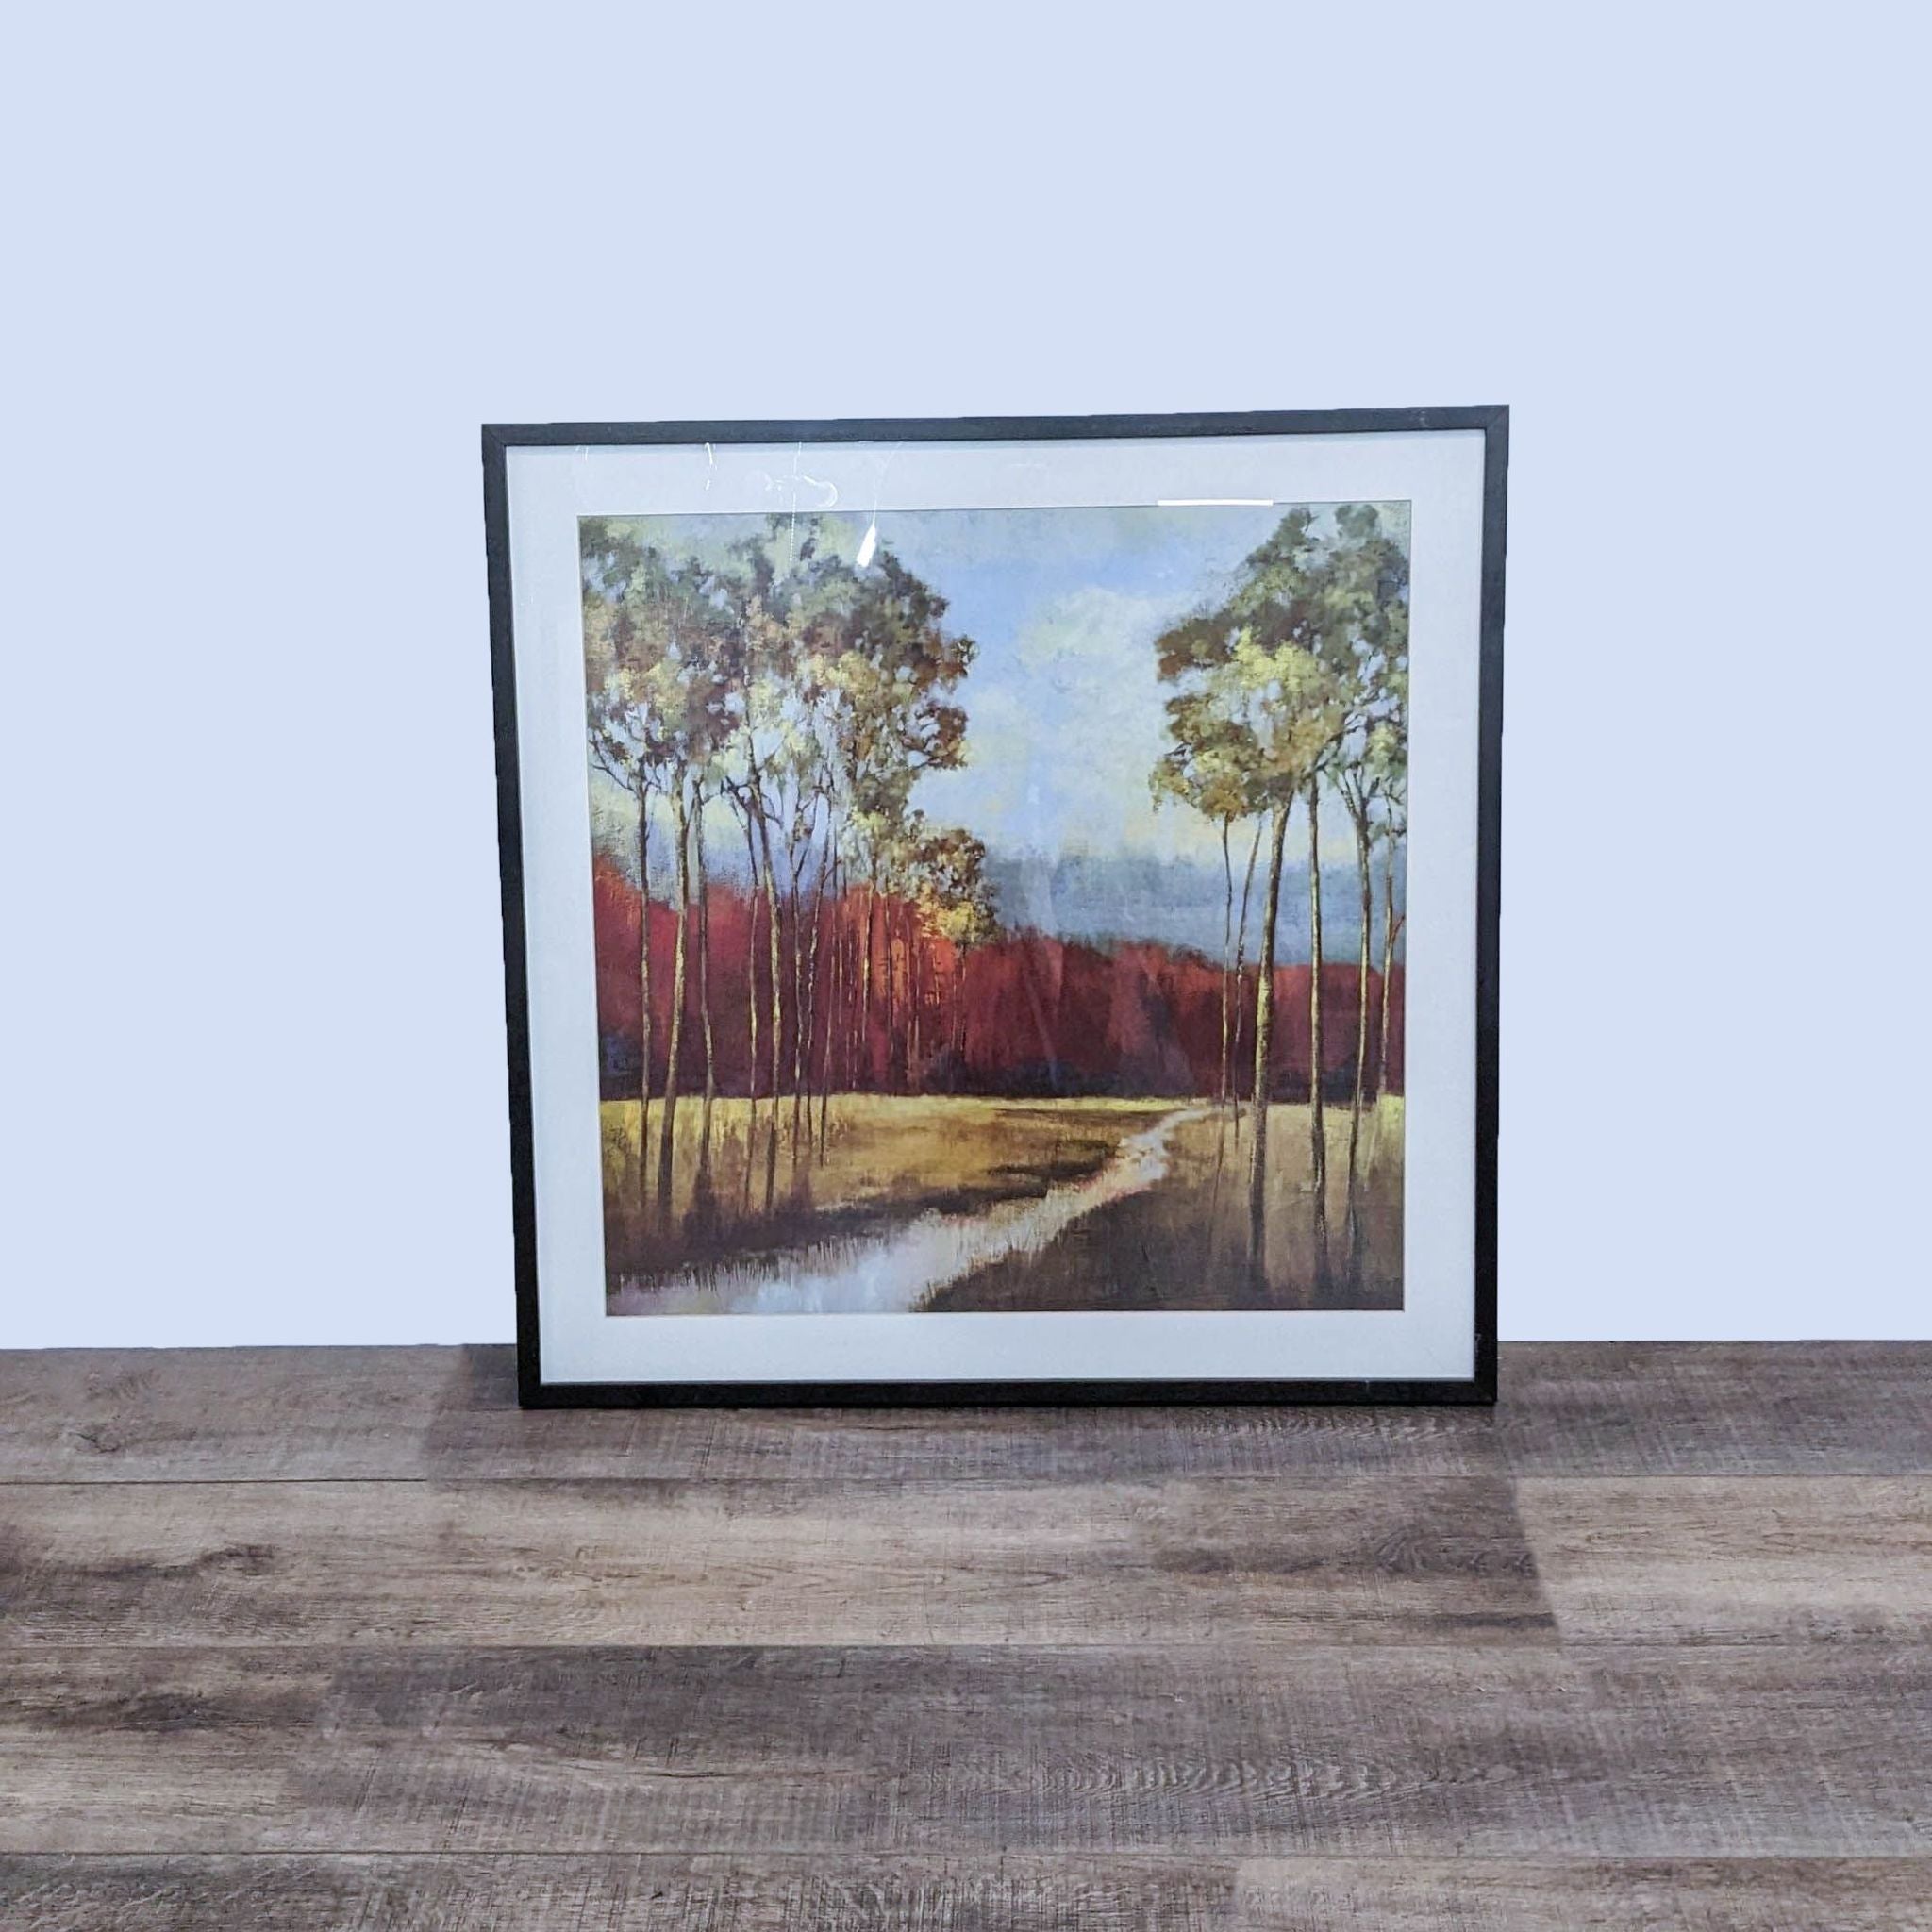 Framed landscape painting by Art.com with trees and reflective water on a wooden floor.